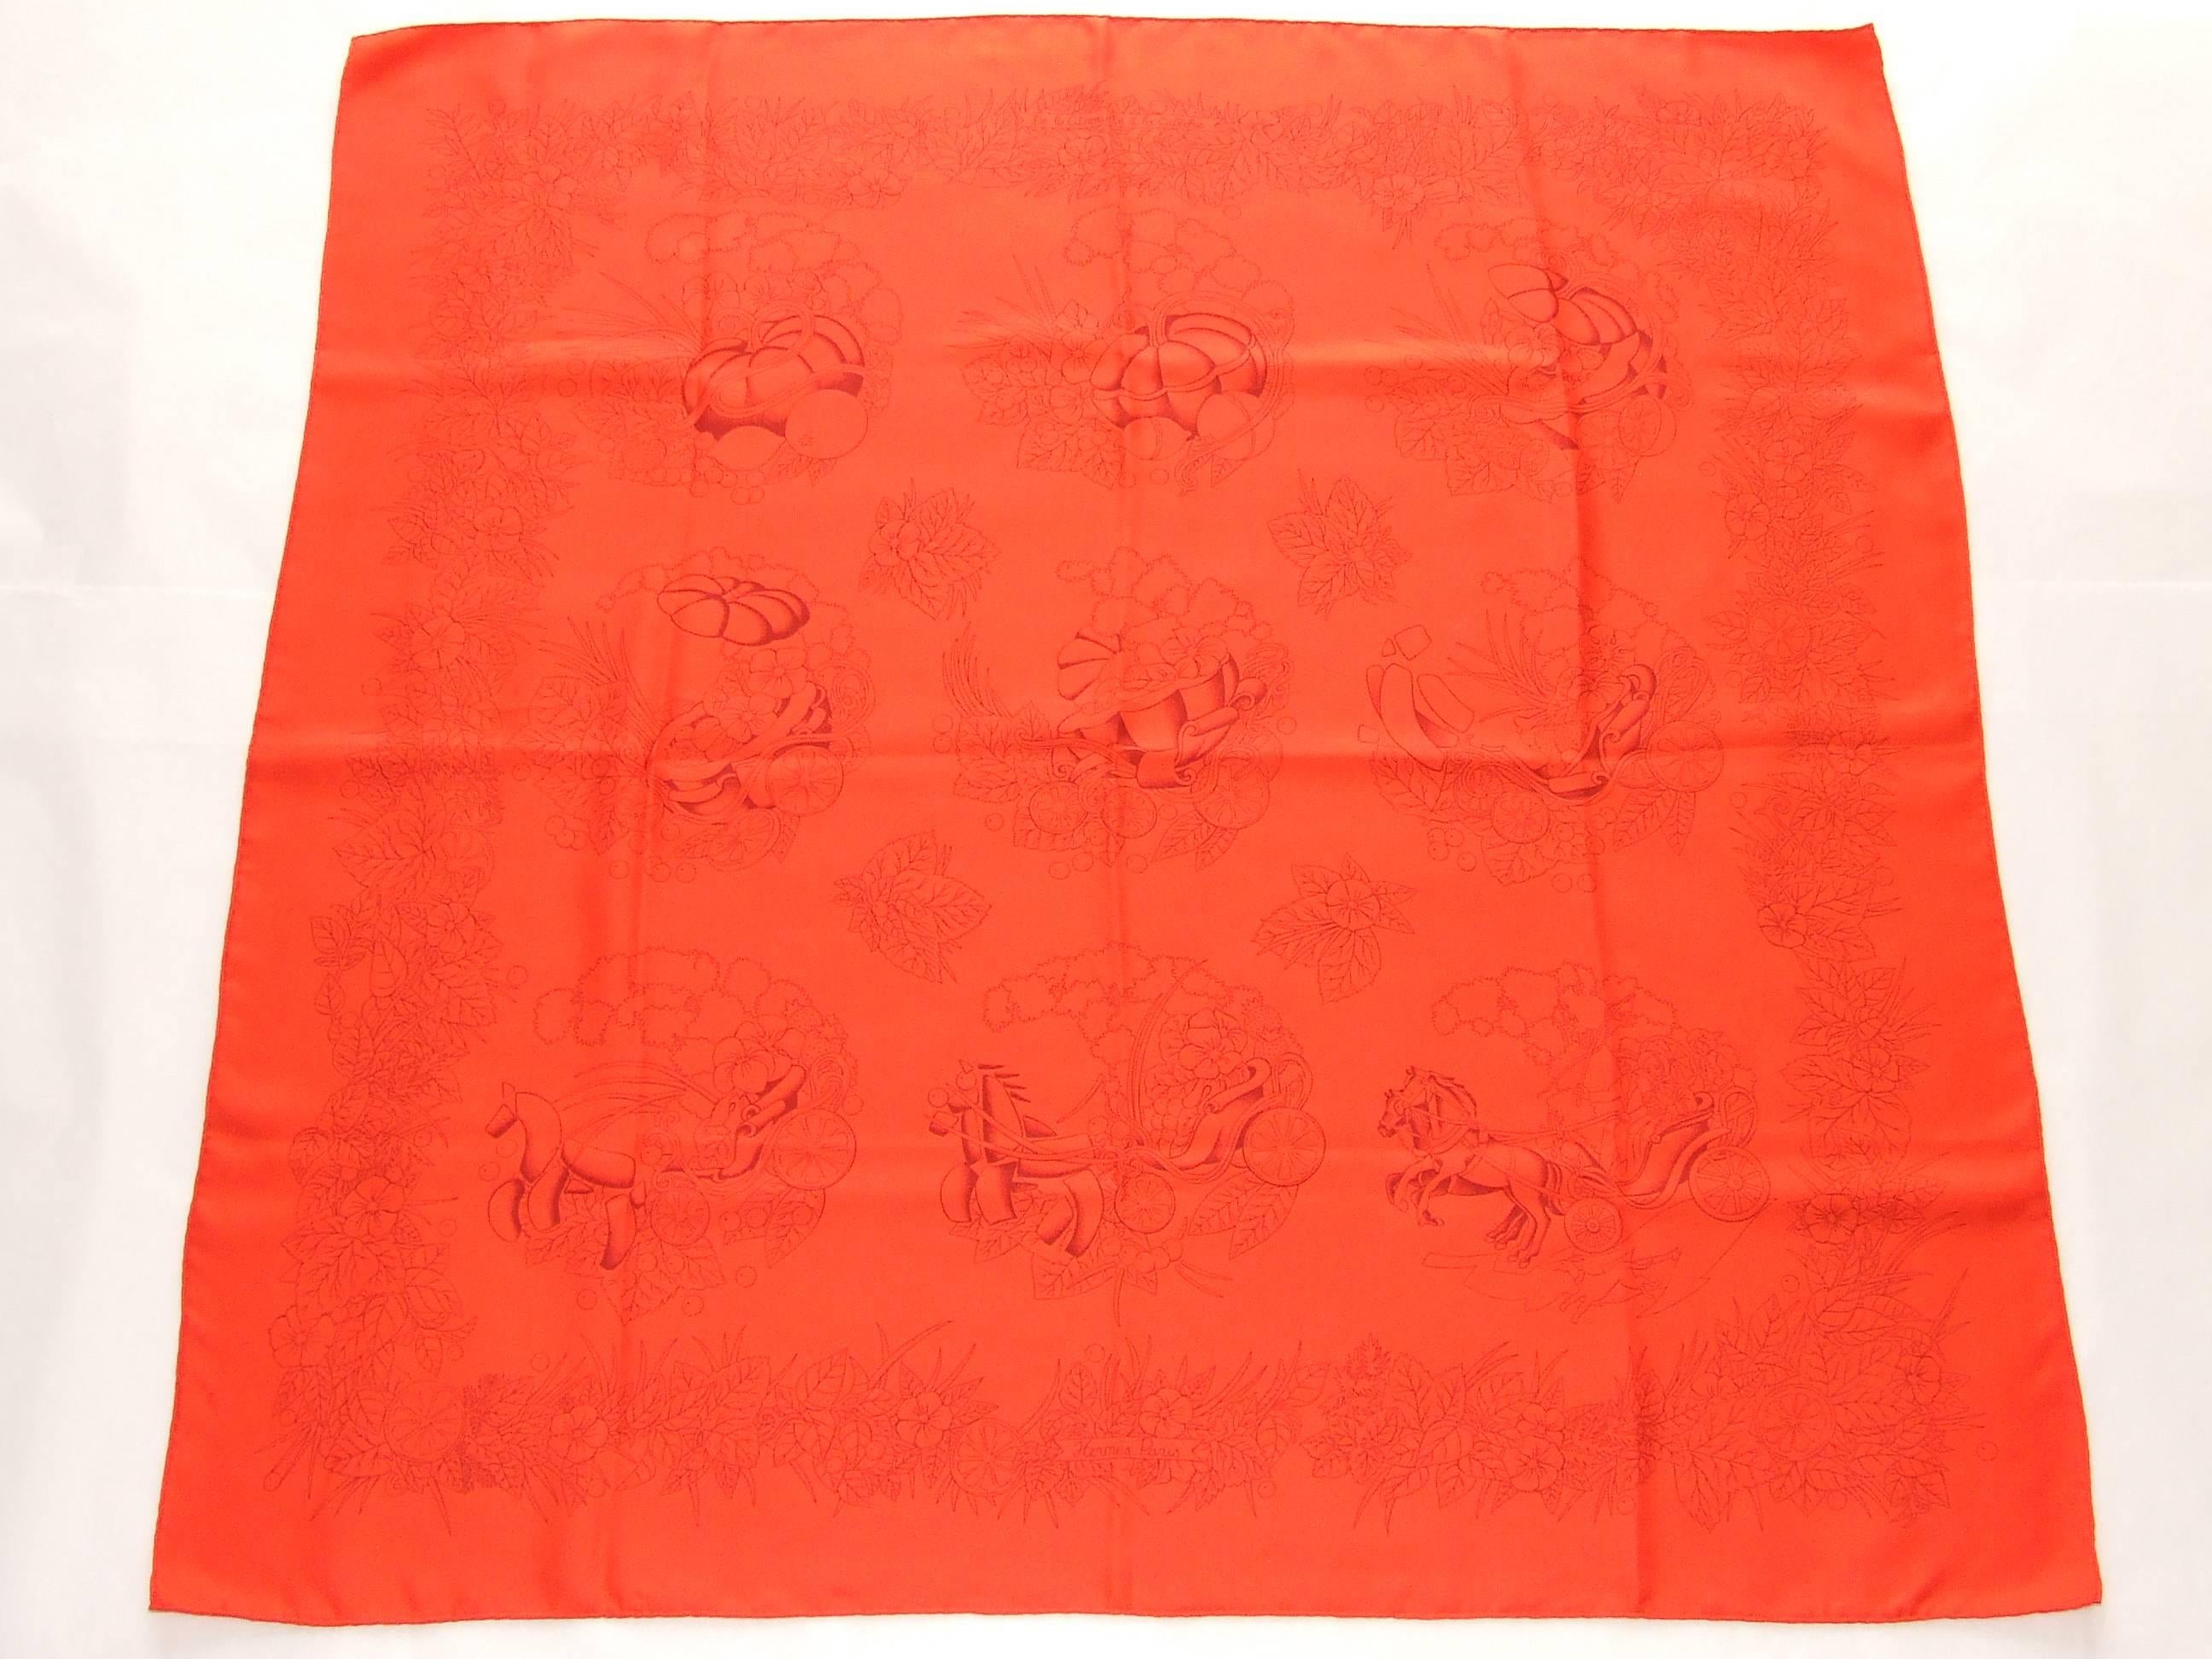 RARE and Beautiful Authentic Hermès Scarf

Print: 